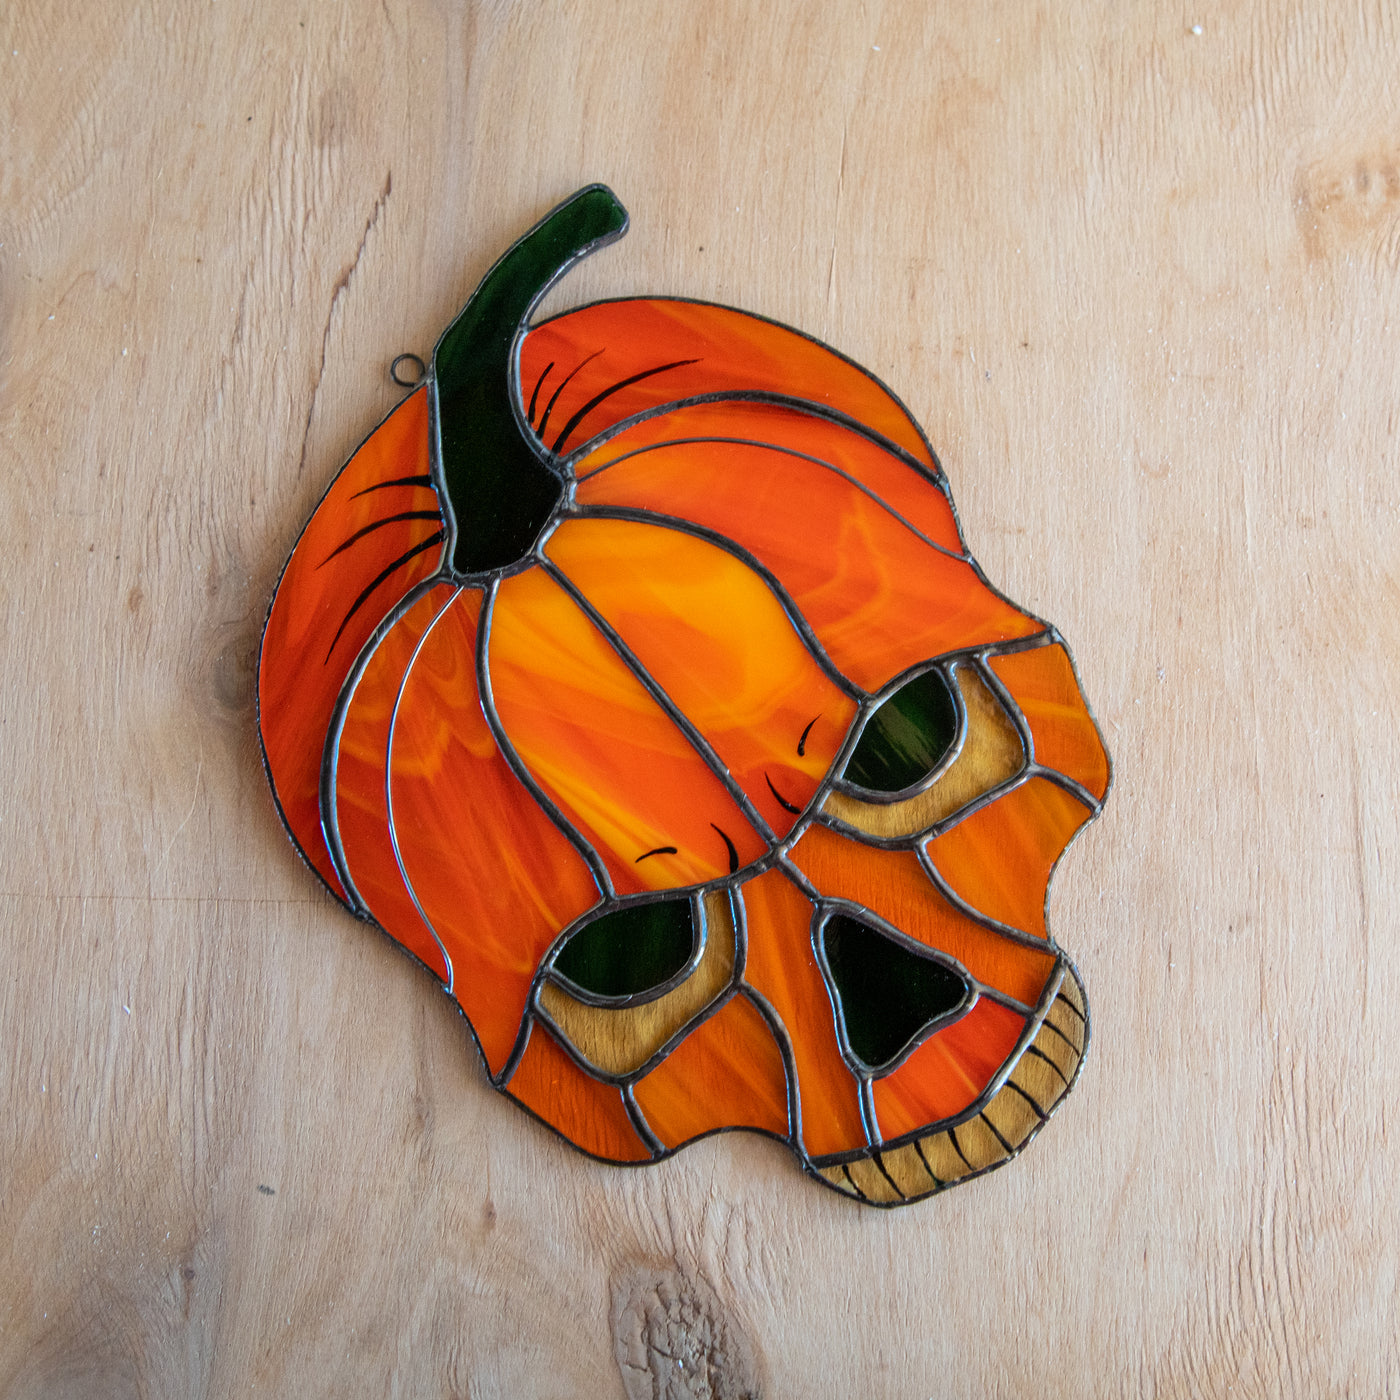 Stained glass pumpkin skull window hanging for ghastly Halloween decor